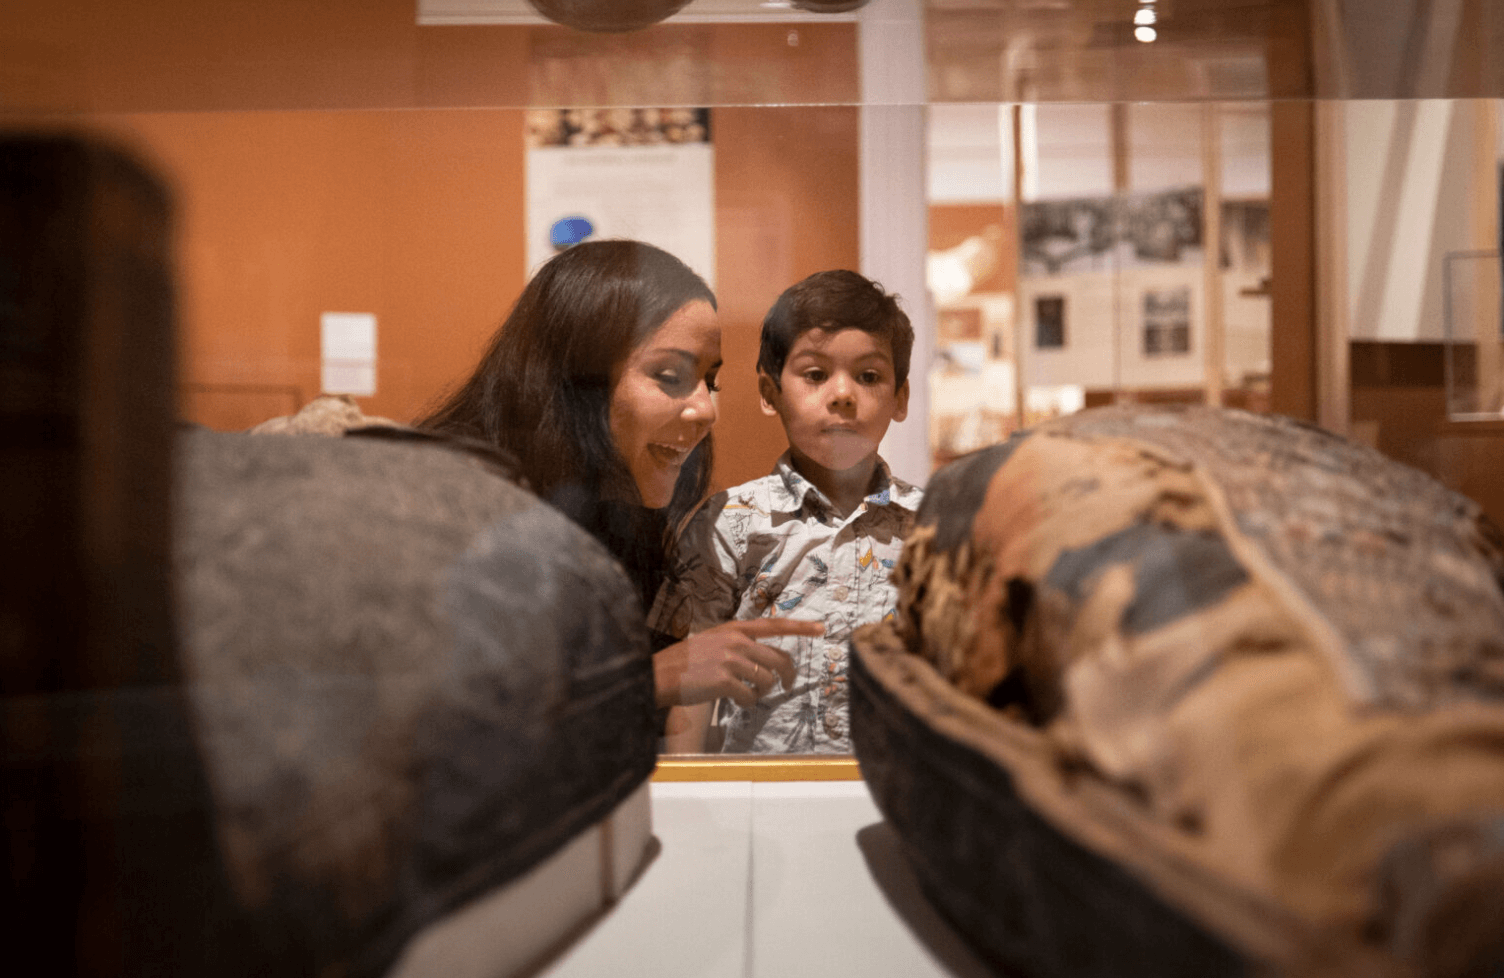 Curator teaches young boy about the mummy